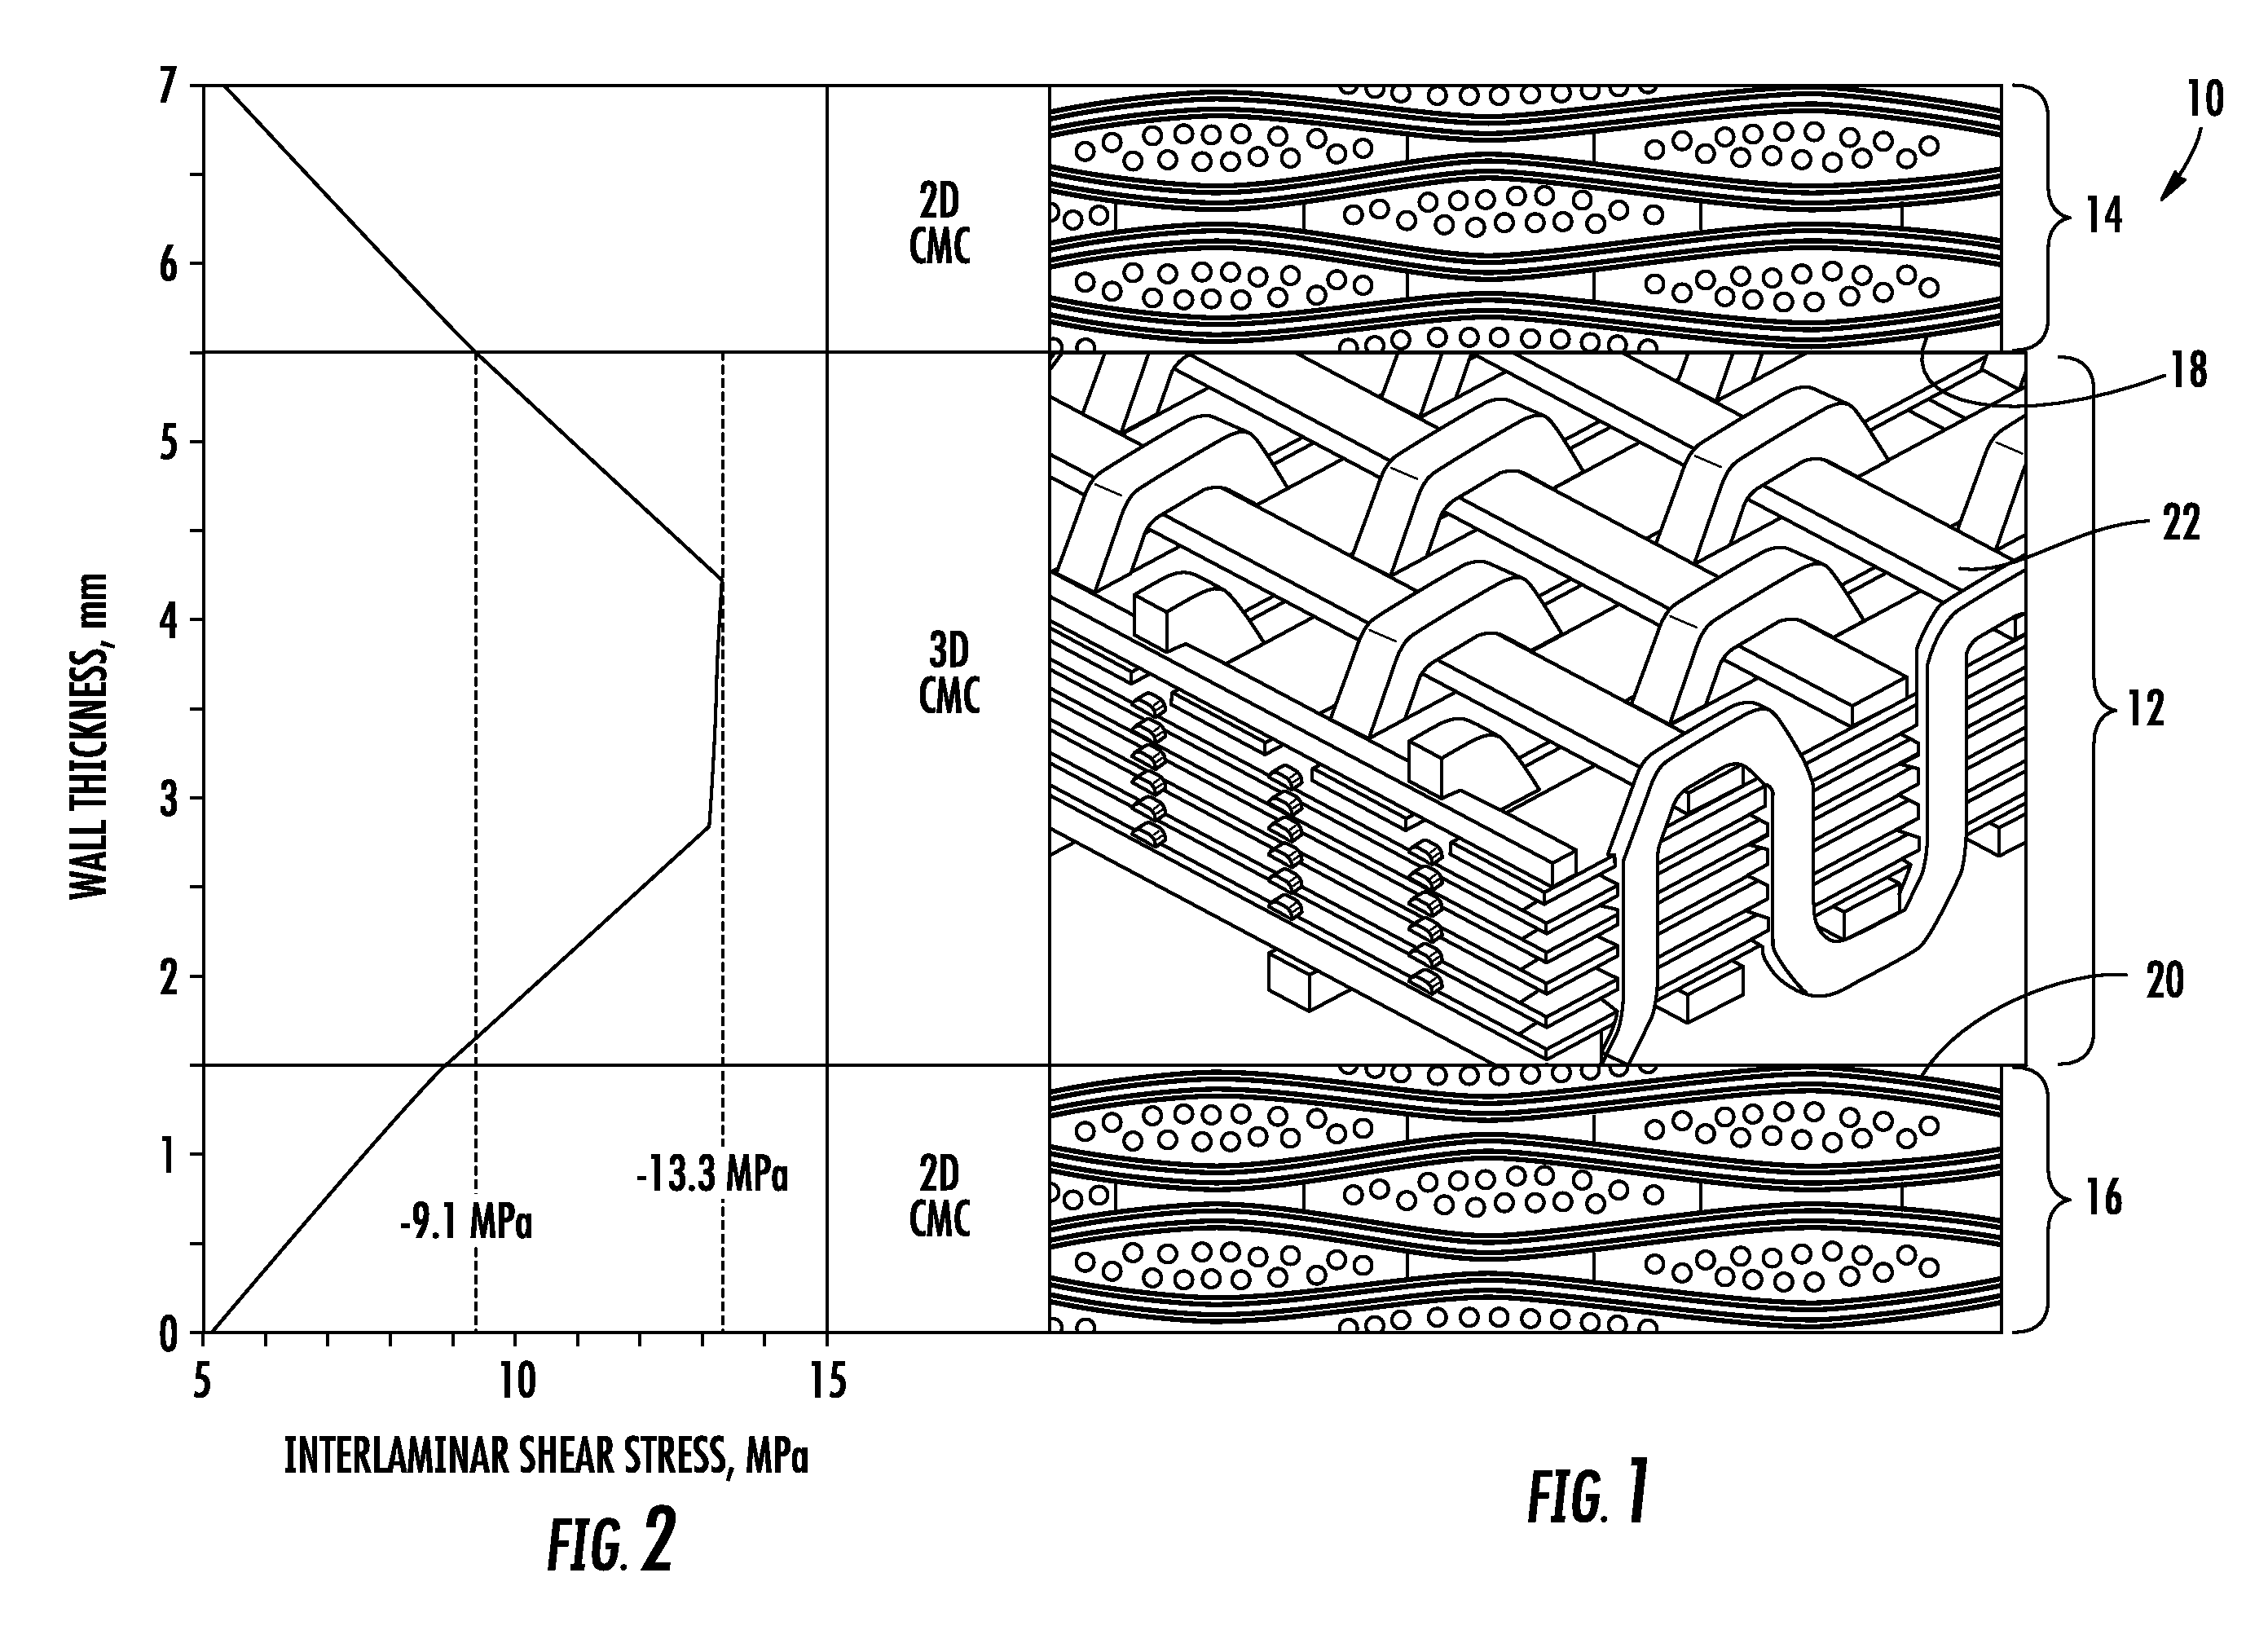 Multilayered ceramic matrix composite structure having increased structural strength